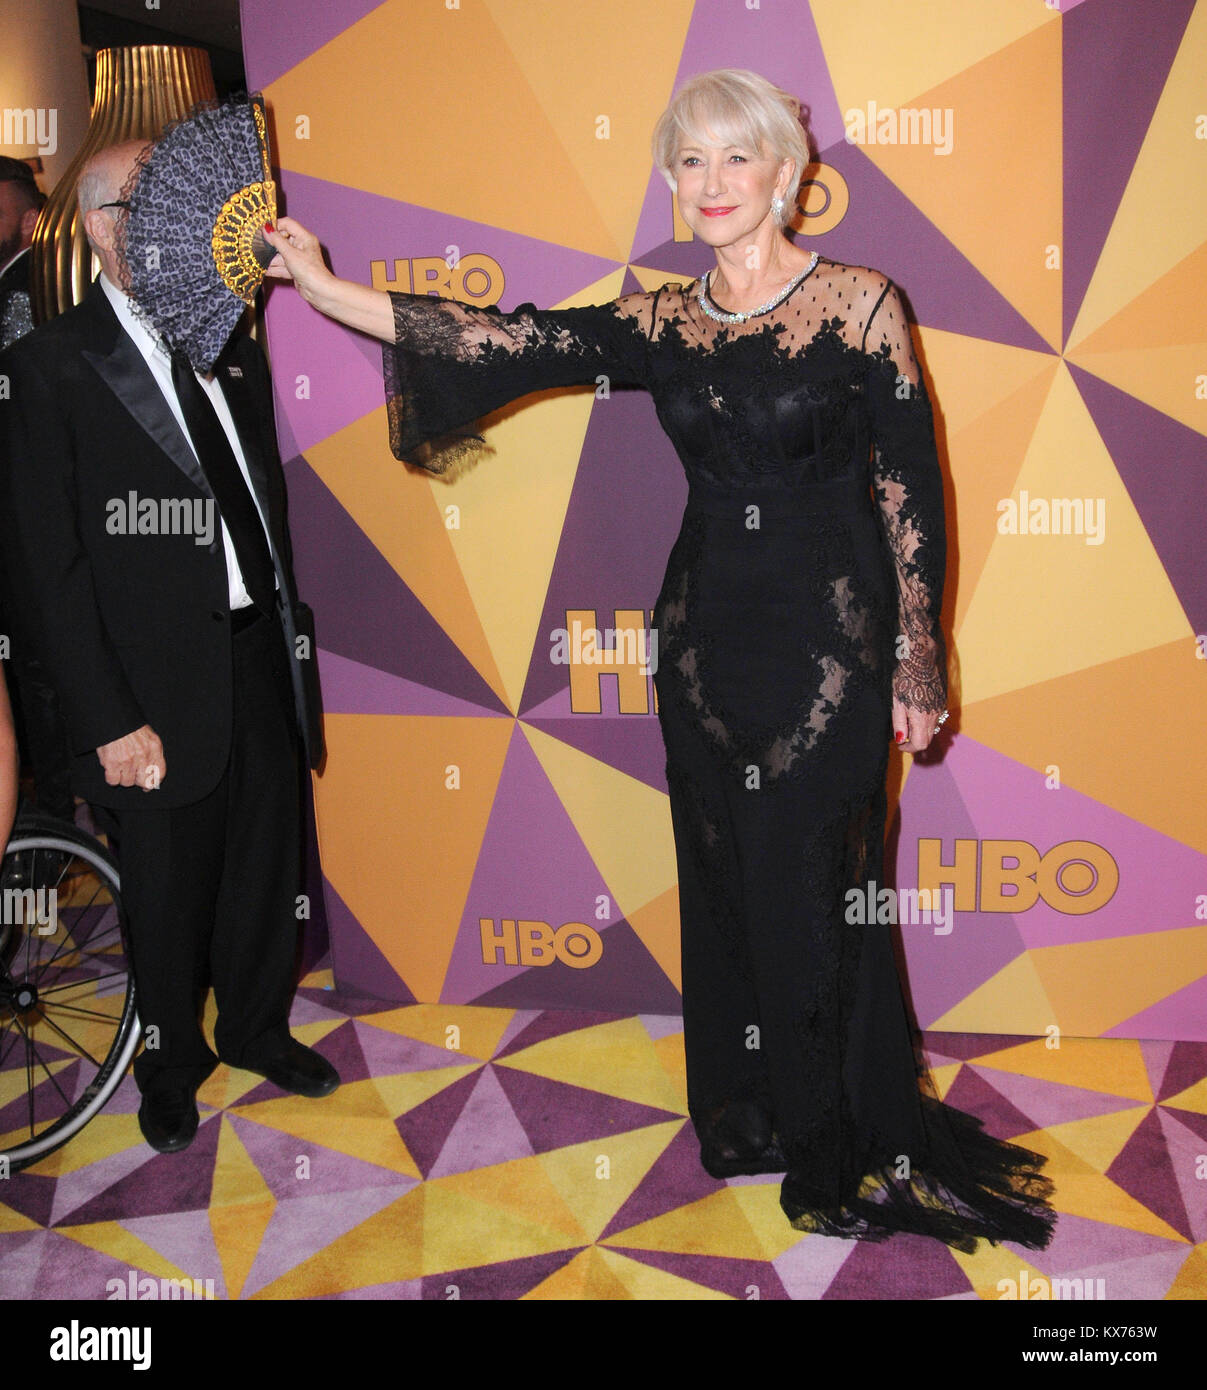 January 7, 2018 - Beverly Hills, CA, U.S. - 07 January 2018 - Beverly Hills, California - Helen Mirren. 2018 HBO Golden Globes After Party held at The Beverly Hilton Hotel in Beverly Hills. Photo Credit: Birdie Thompson/AdMedia (Credit Image: © Birdie Thompson/AdMedia via ZUMA Wire) Stock Photo